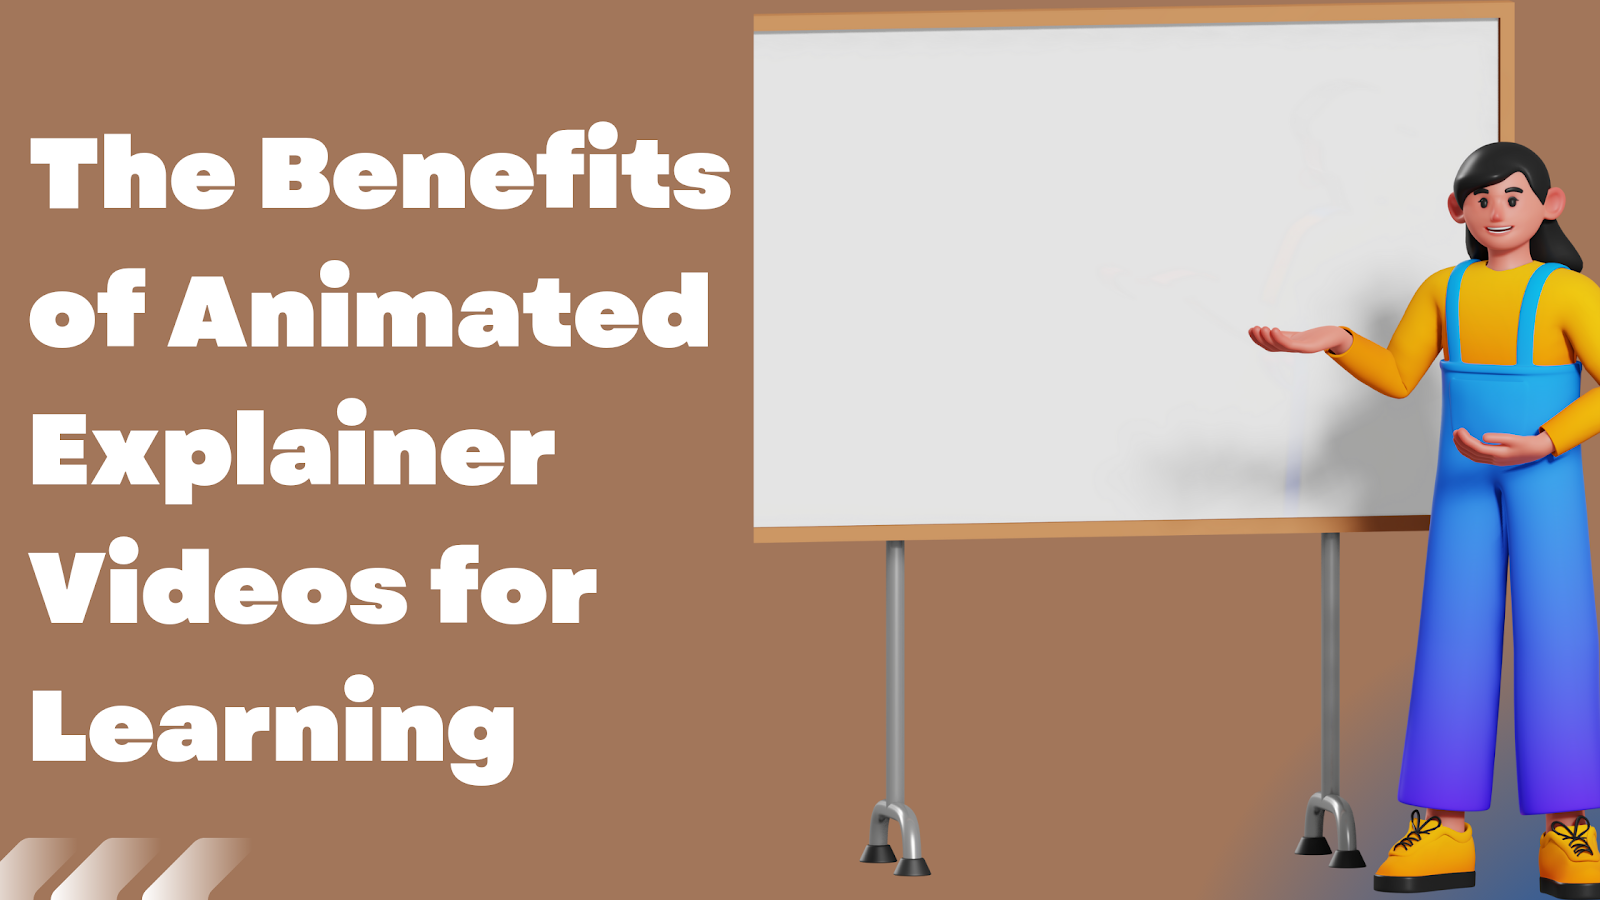 The Benefits of Animated Explainer Videos for Learning